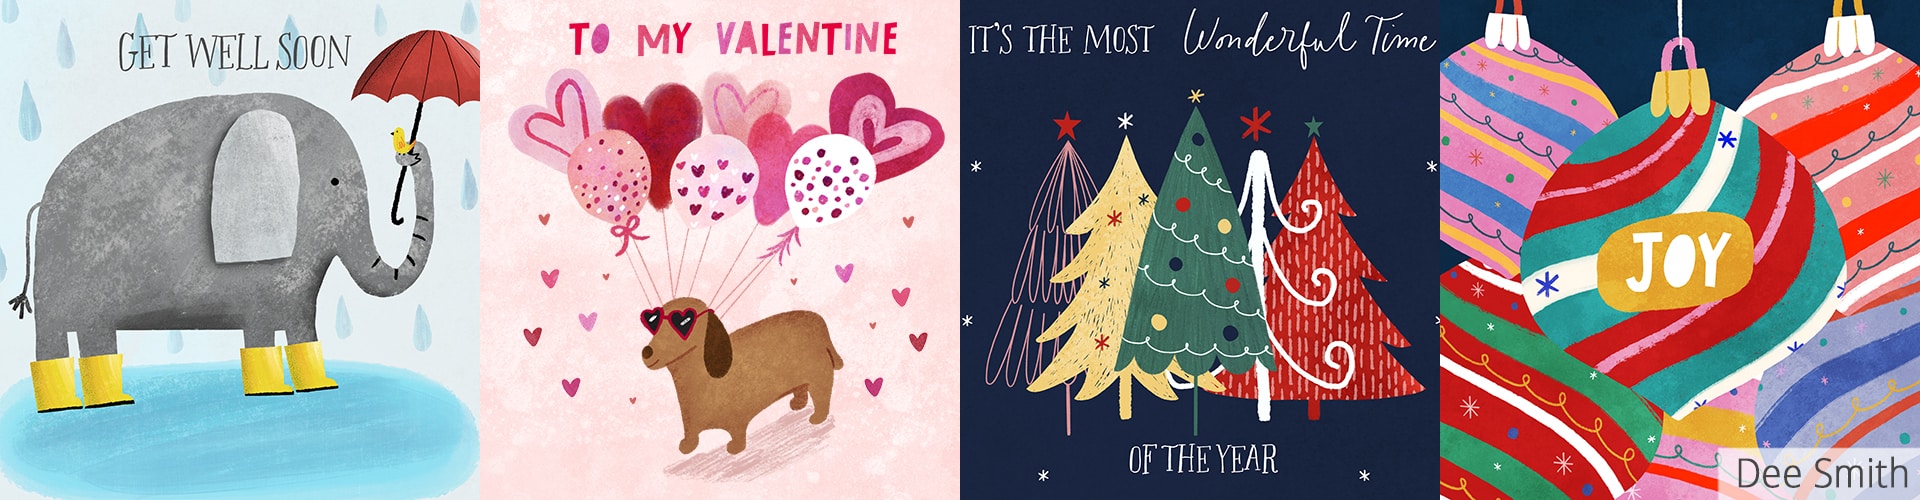 Various greeting card designs by Dee Smith illustrator for art licensing